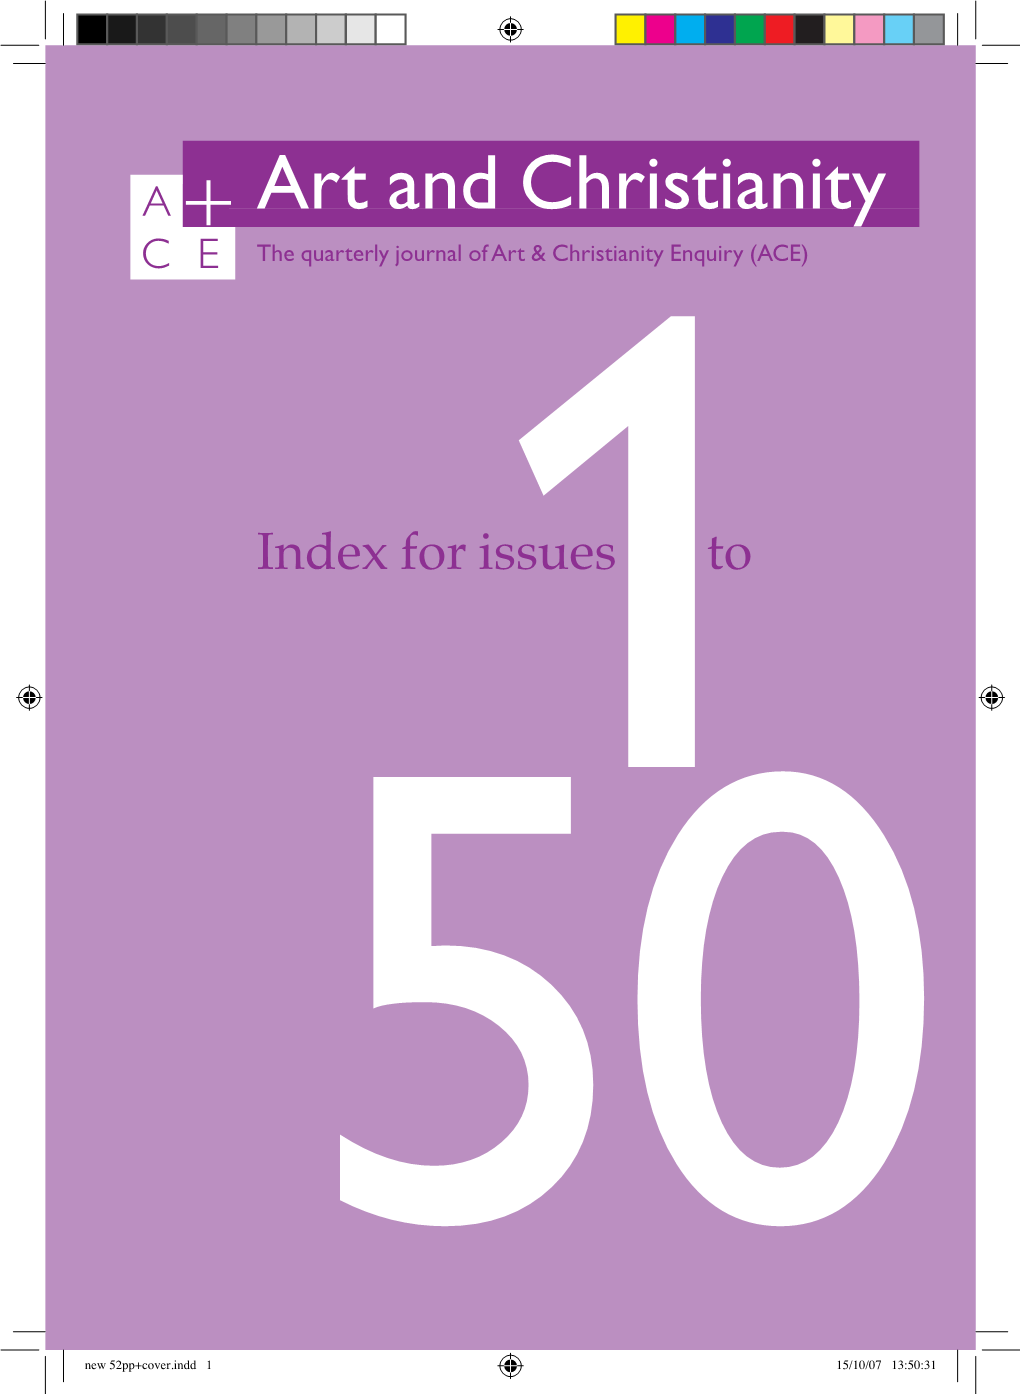 Art and Christianity £5 the Quarterly Journal of Art & Christianity Enquiry (ACE)